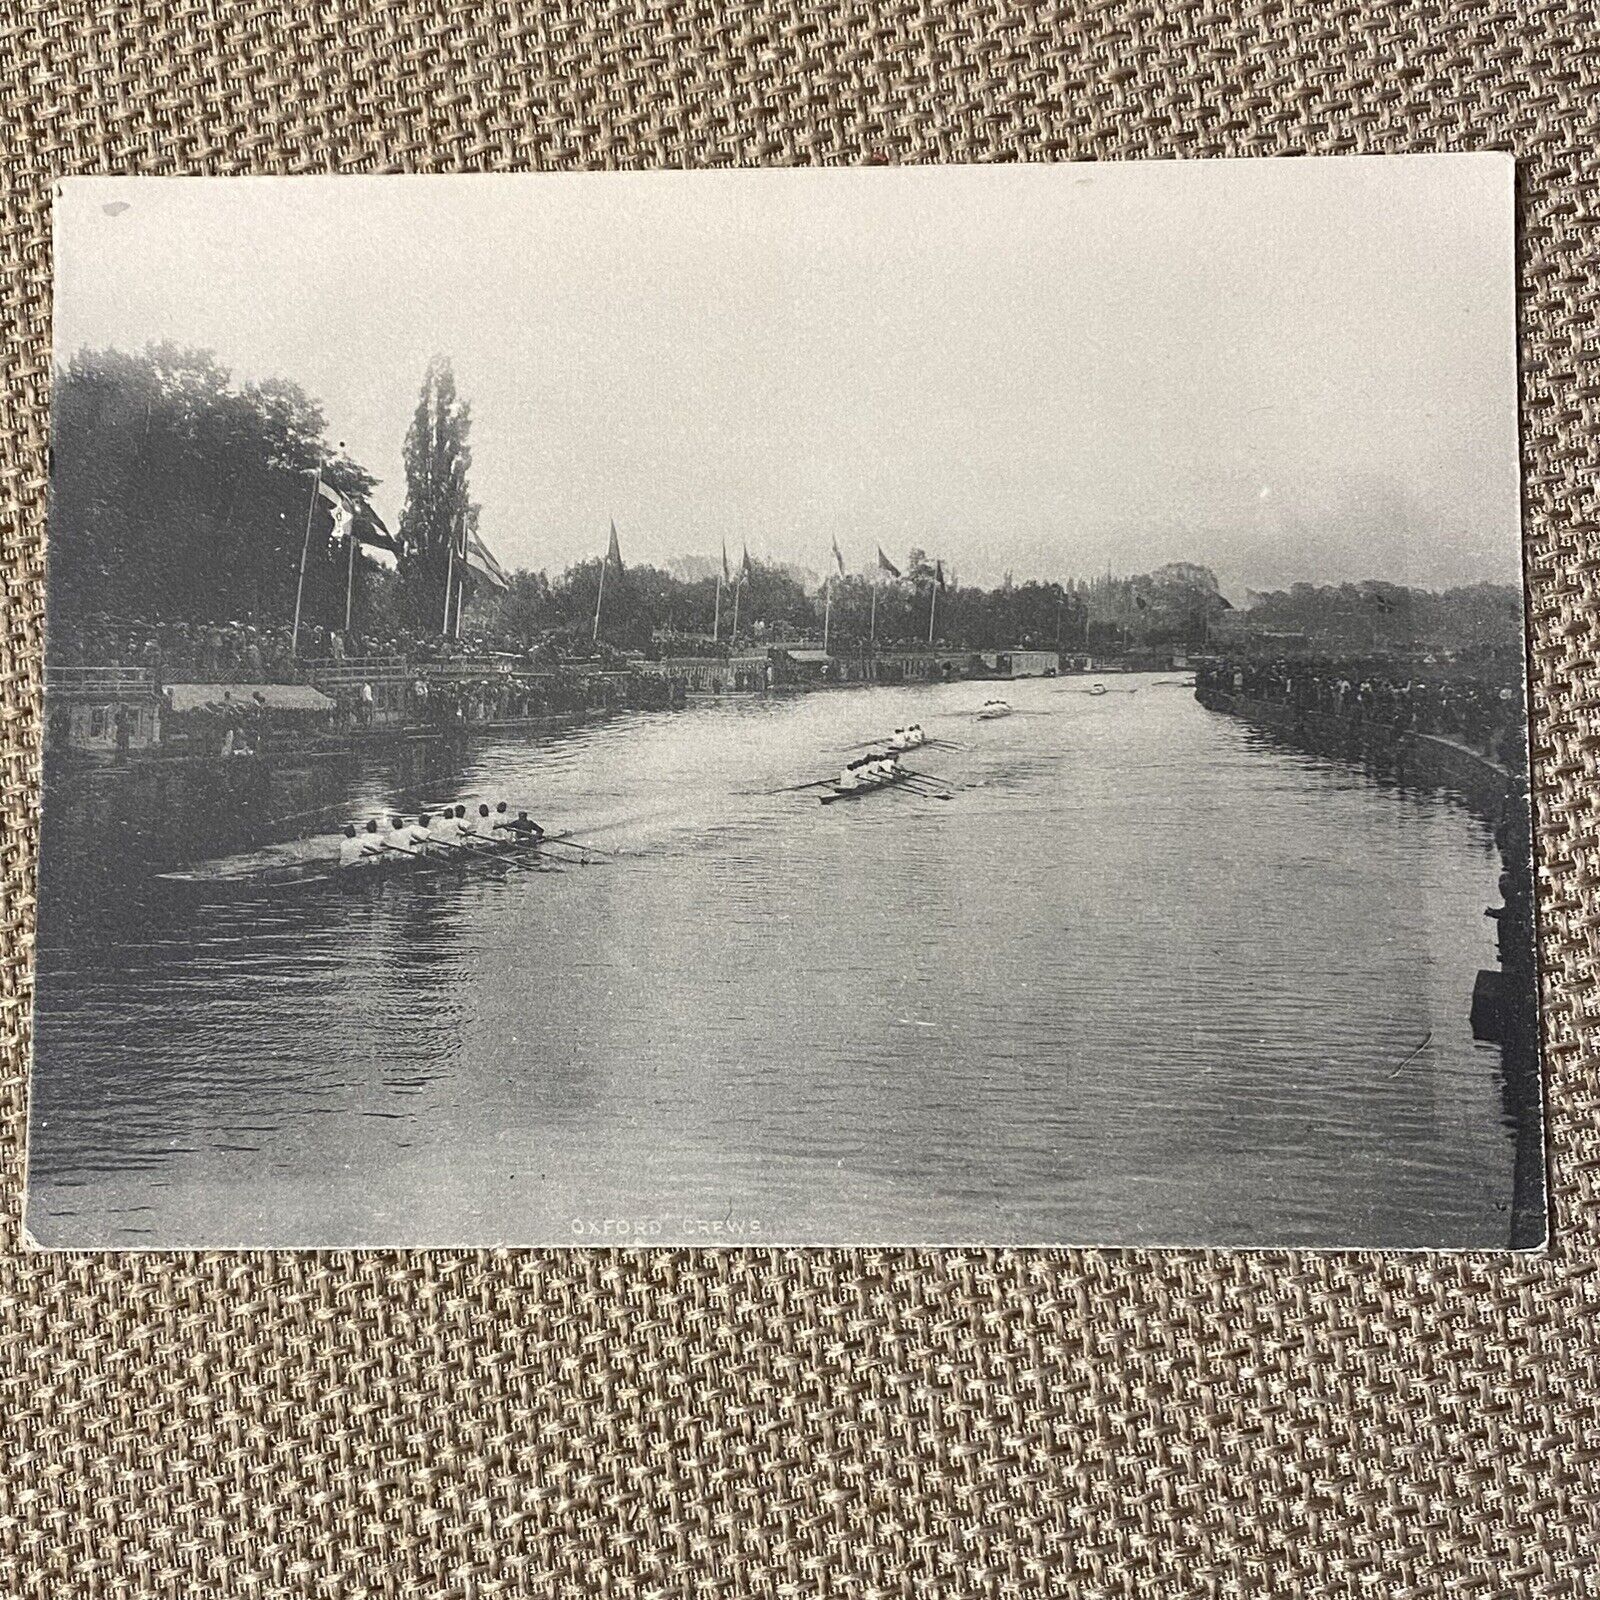 Vintage Crew Oxford Rowing UK Postcard Frith\'s Series RPPC Pictorial Card Large